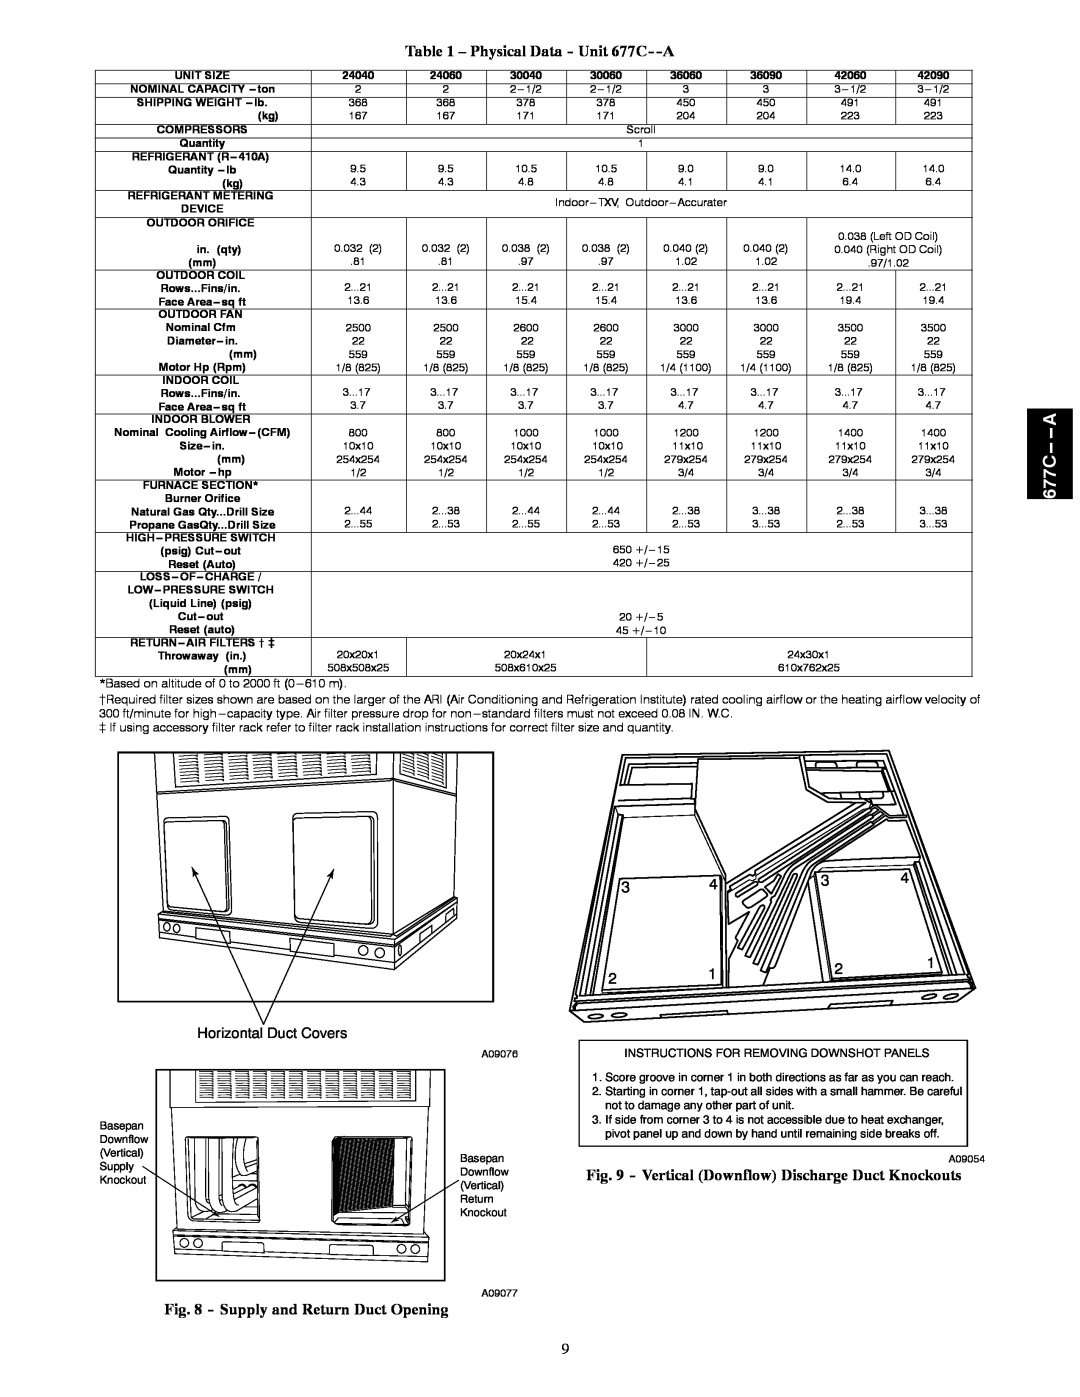 Bryant 677C--A Supply and Return Duct Opening, 677C-- --A, Horizontal Duct Covers, Physical Data - Unit 677C 